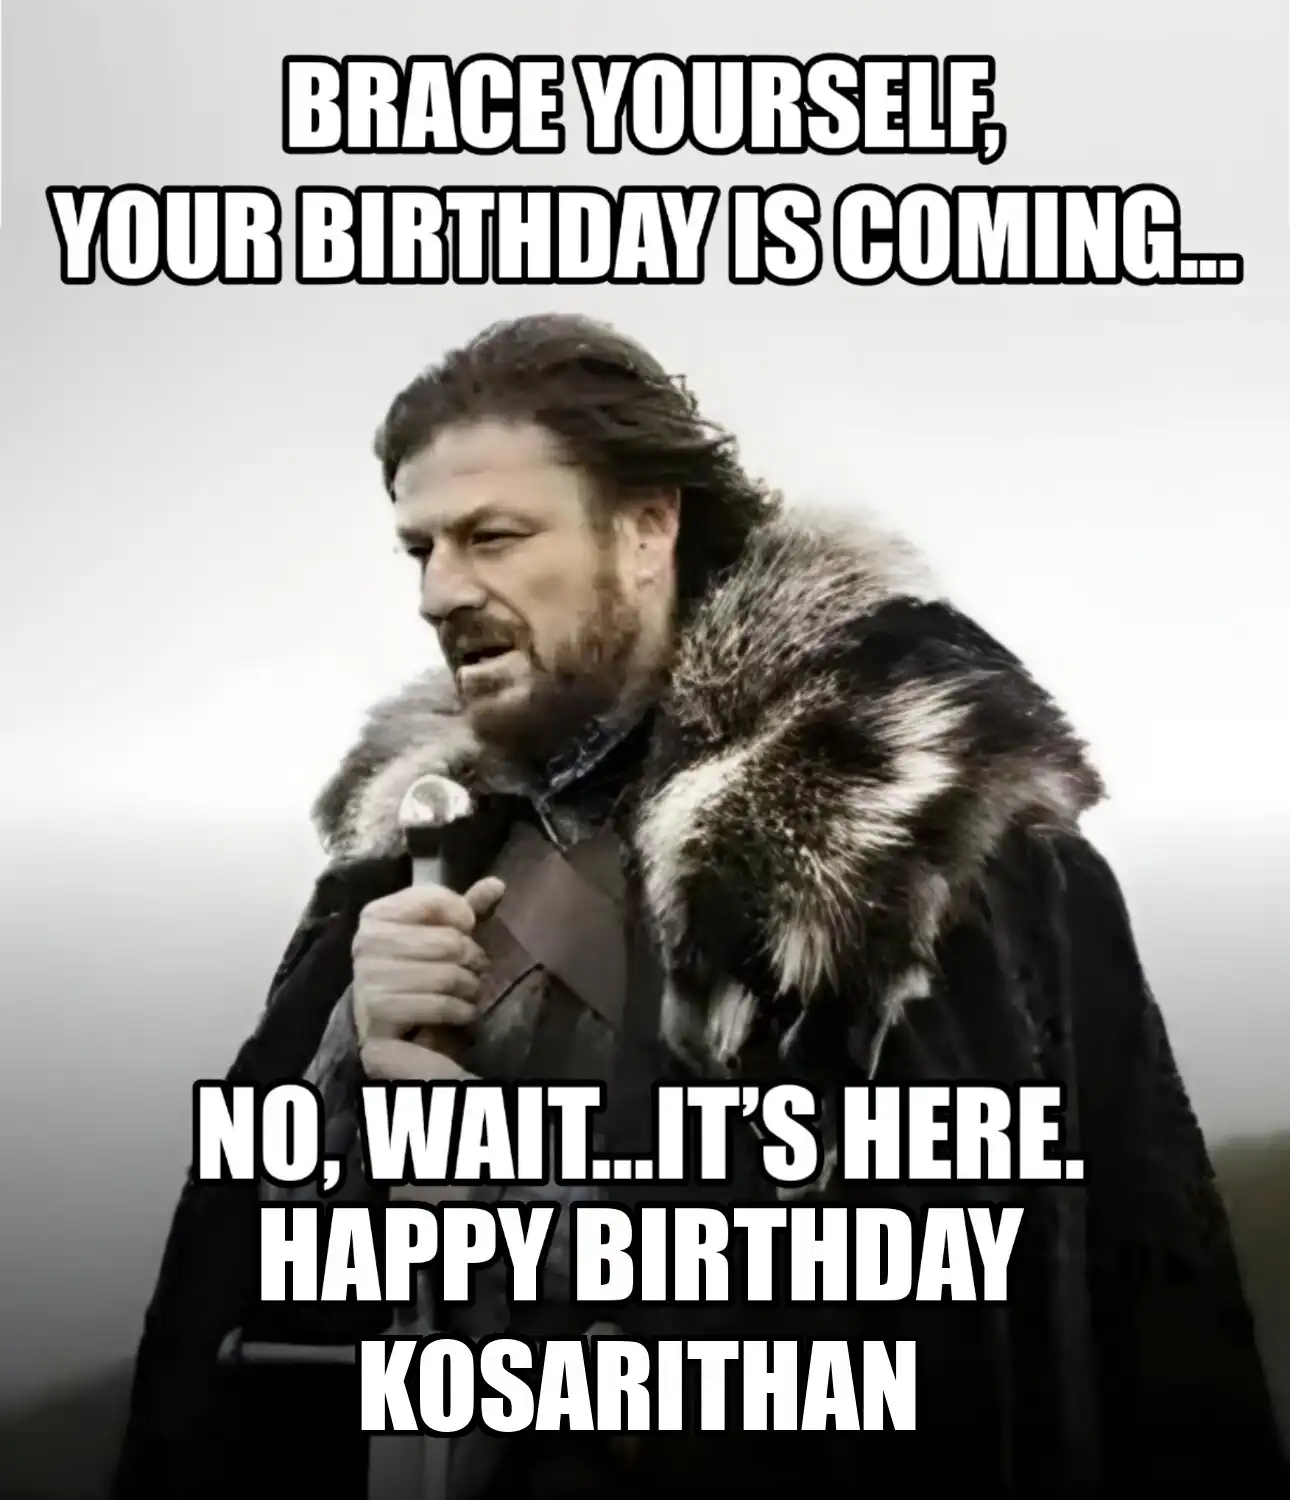 Happy Birthday Kosarithan Brace Yourself Your Birthday Is Coming Meme